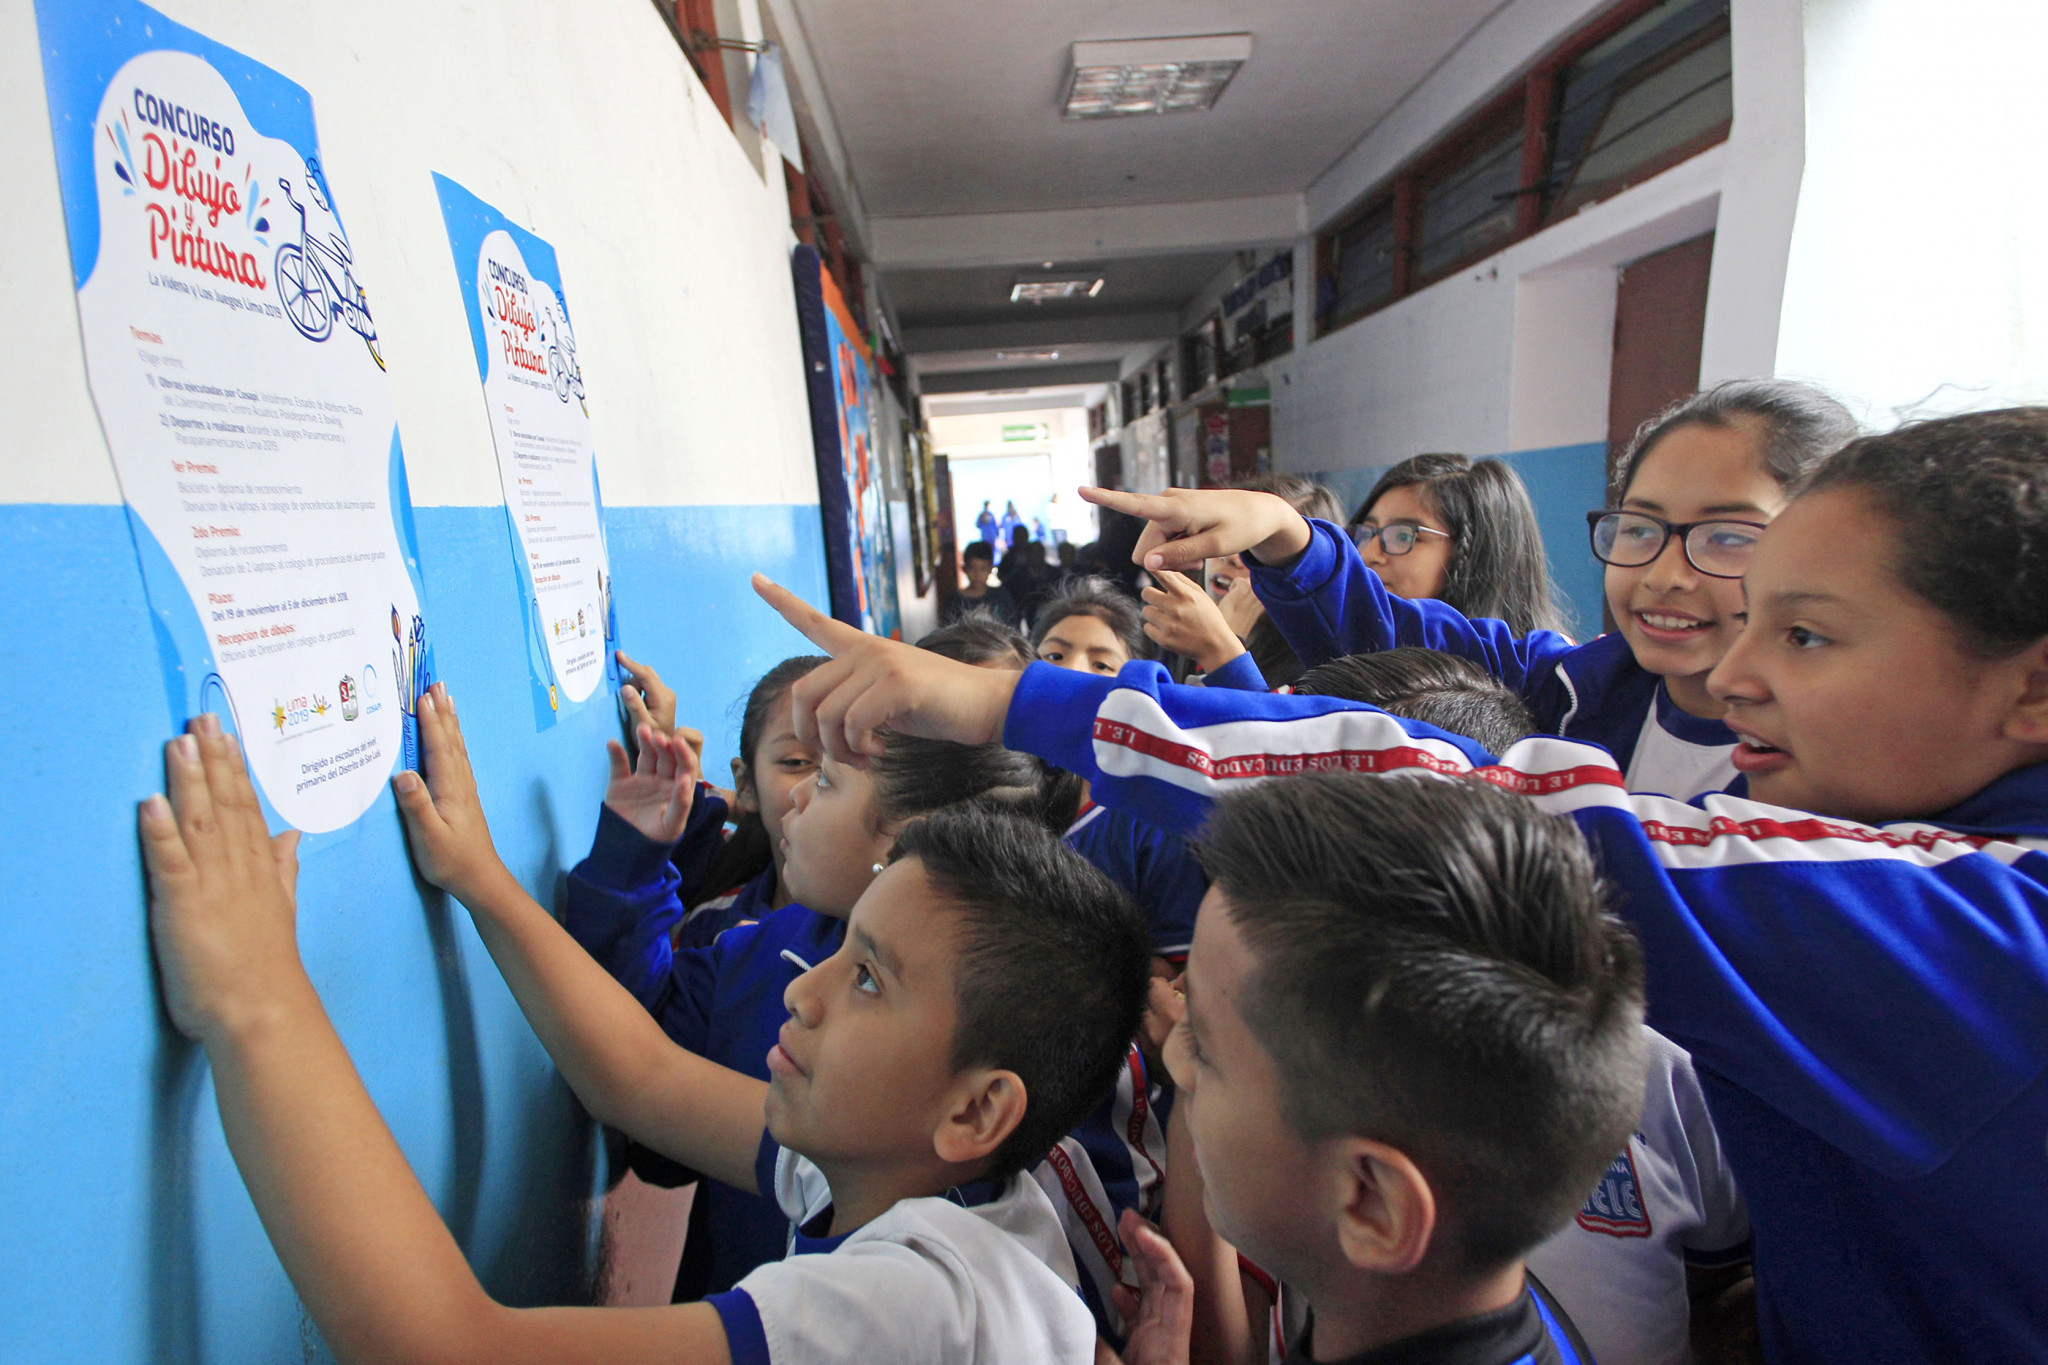 Lima 2019 launches drawing and painting competition to promote sports on Pan and Parapan American Games programmes